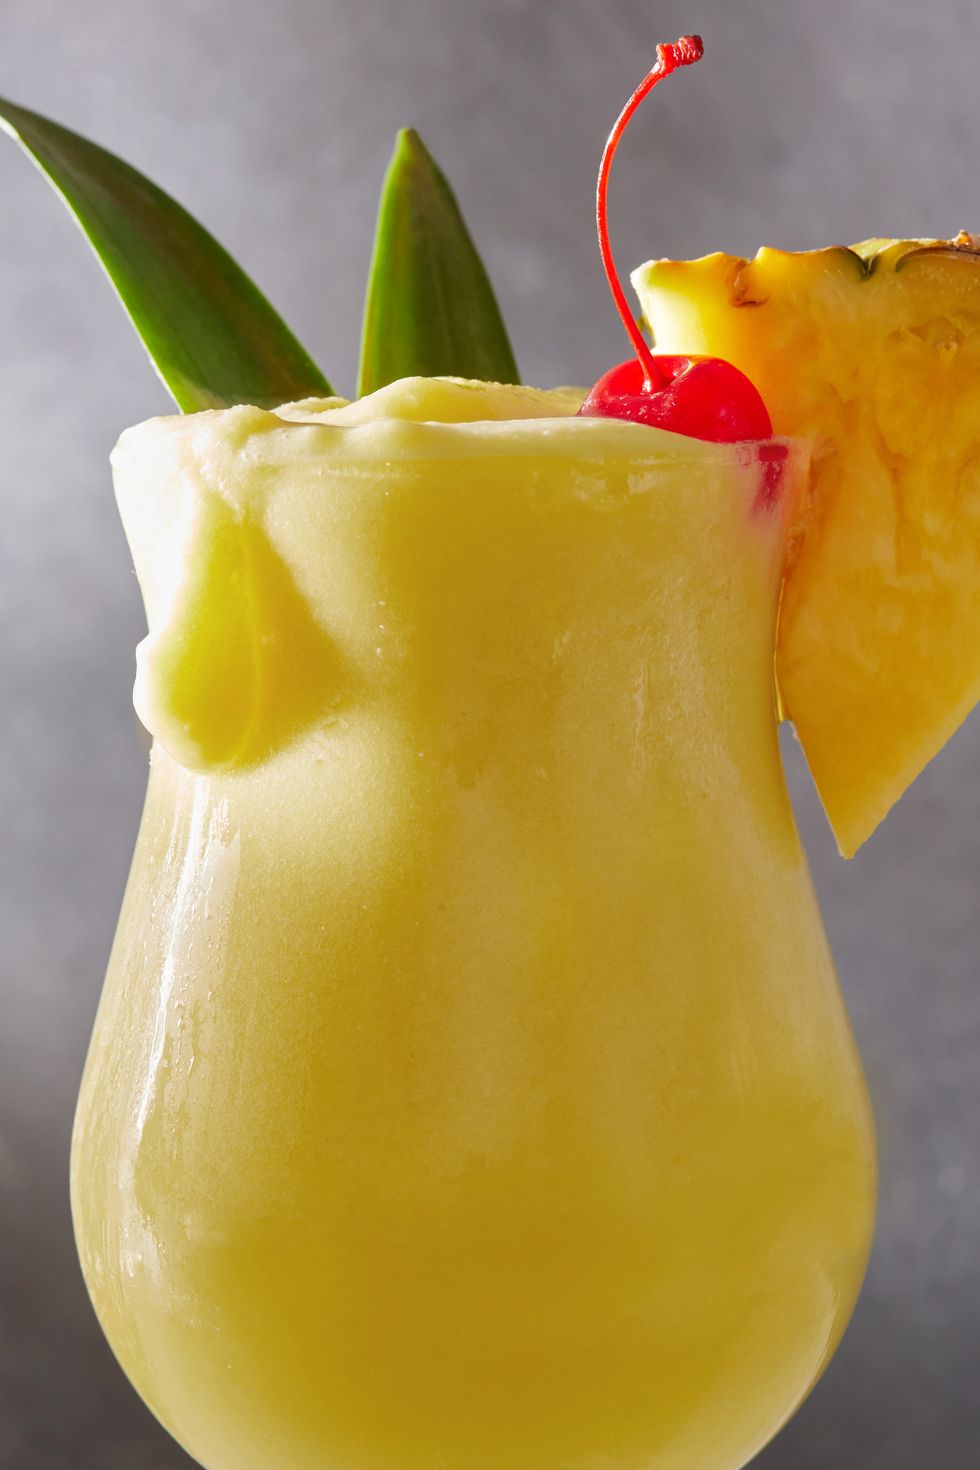 Big Stick Cocktail - Layered Frozen Pineapple Cherry Cocktail